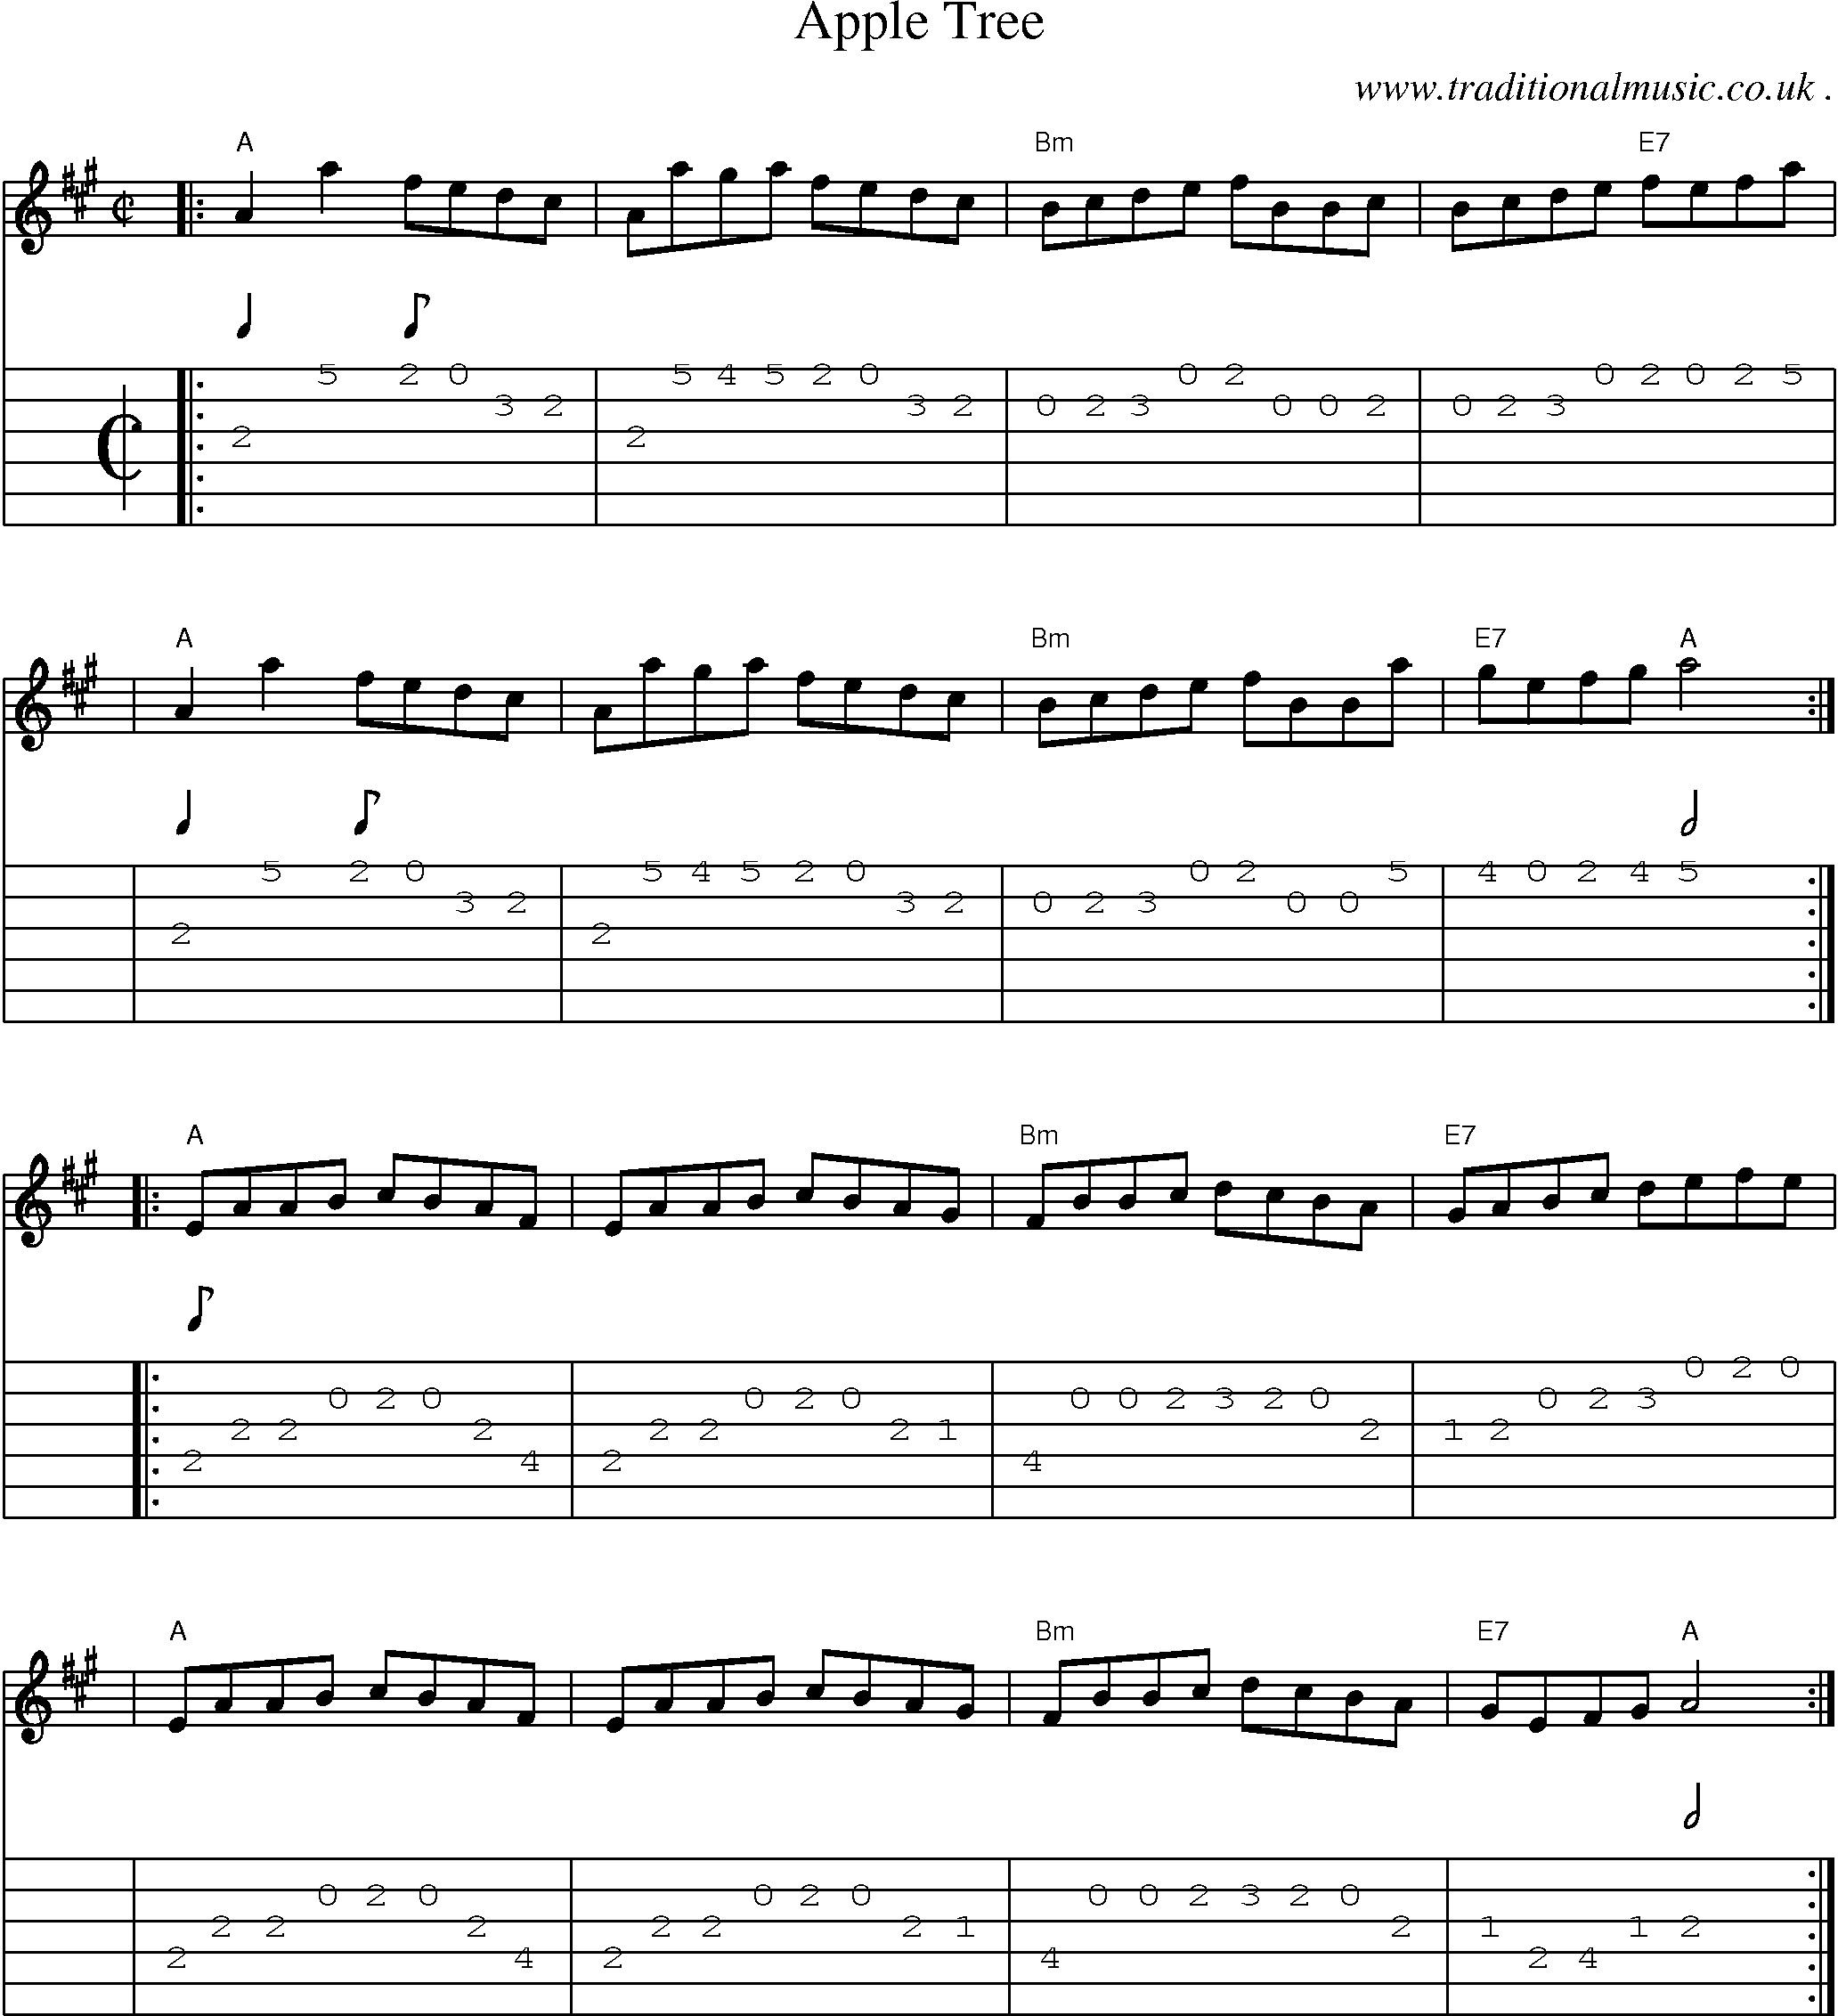 Sheet-music  score, Chords and Guitar Tabs for Apple Tree